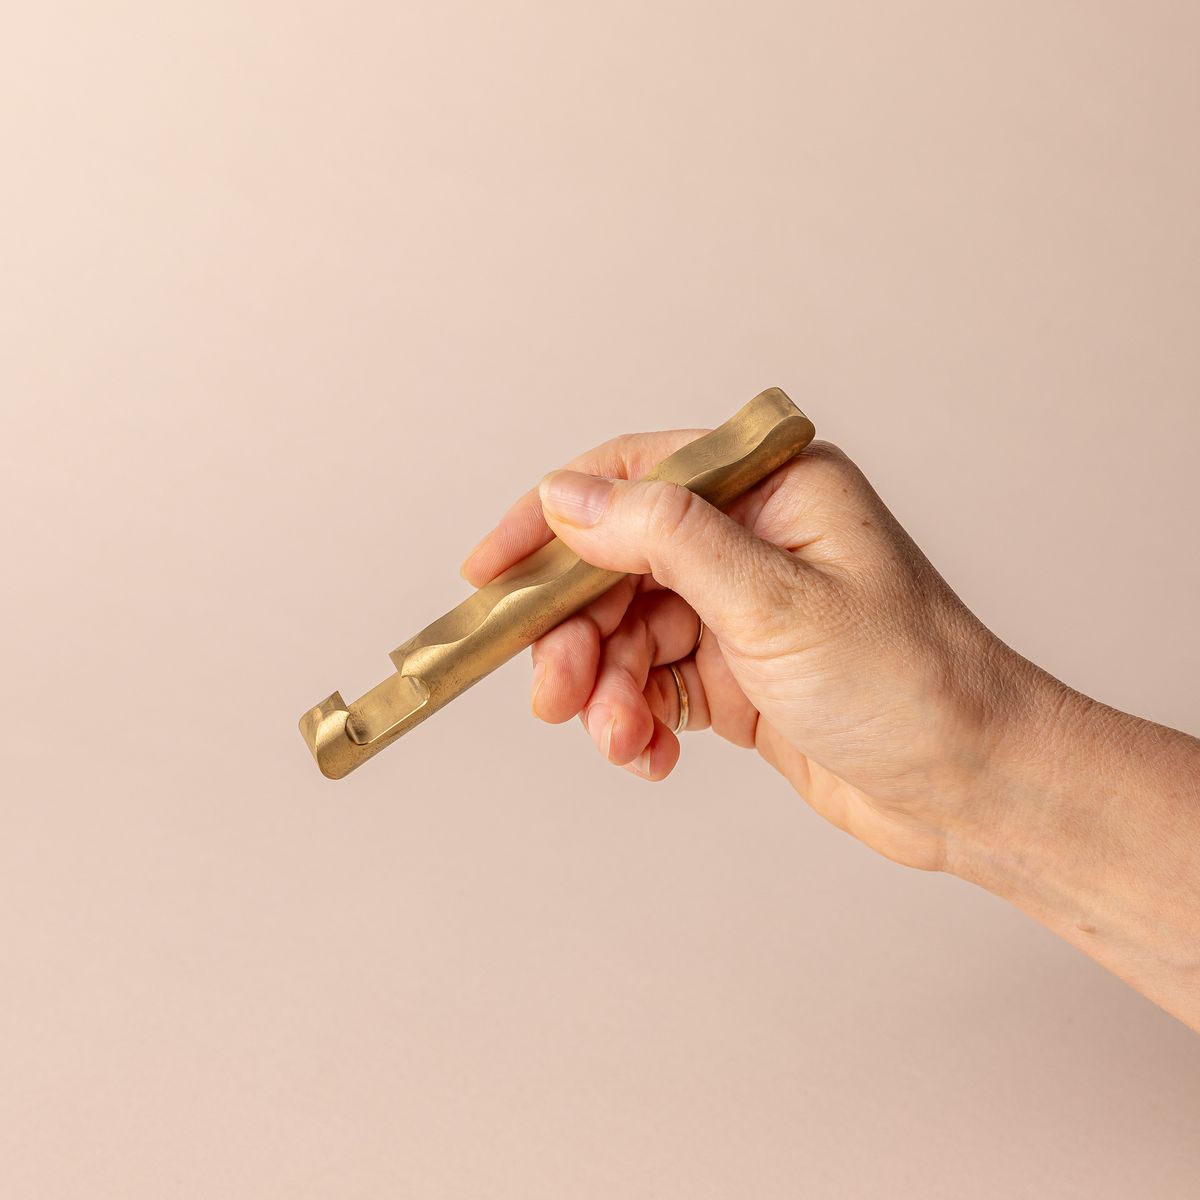 Hand holding a sophisticated brass bottle opener with a simple design and a wave with grooves all along the opener side.